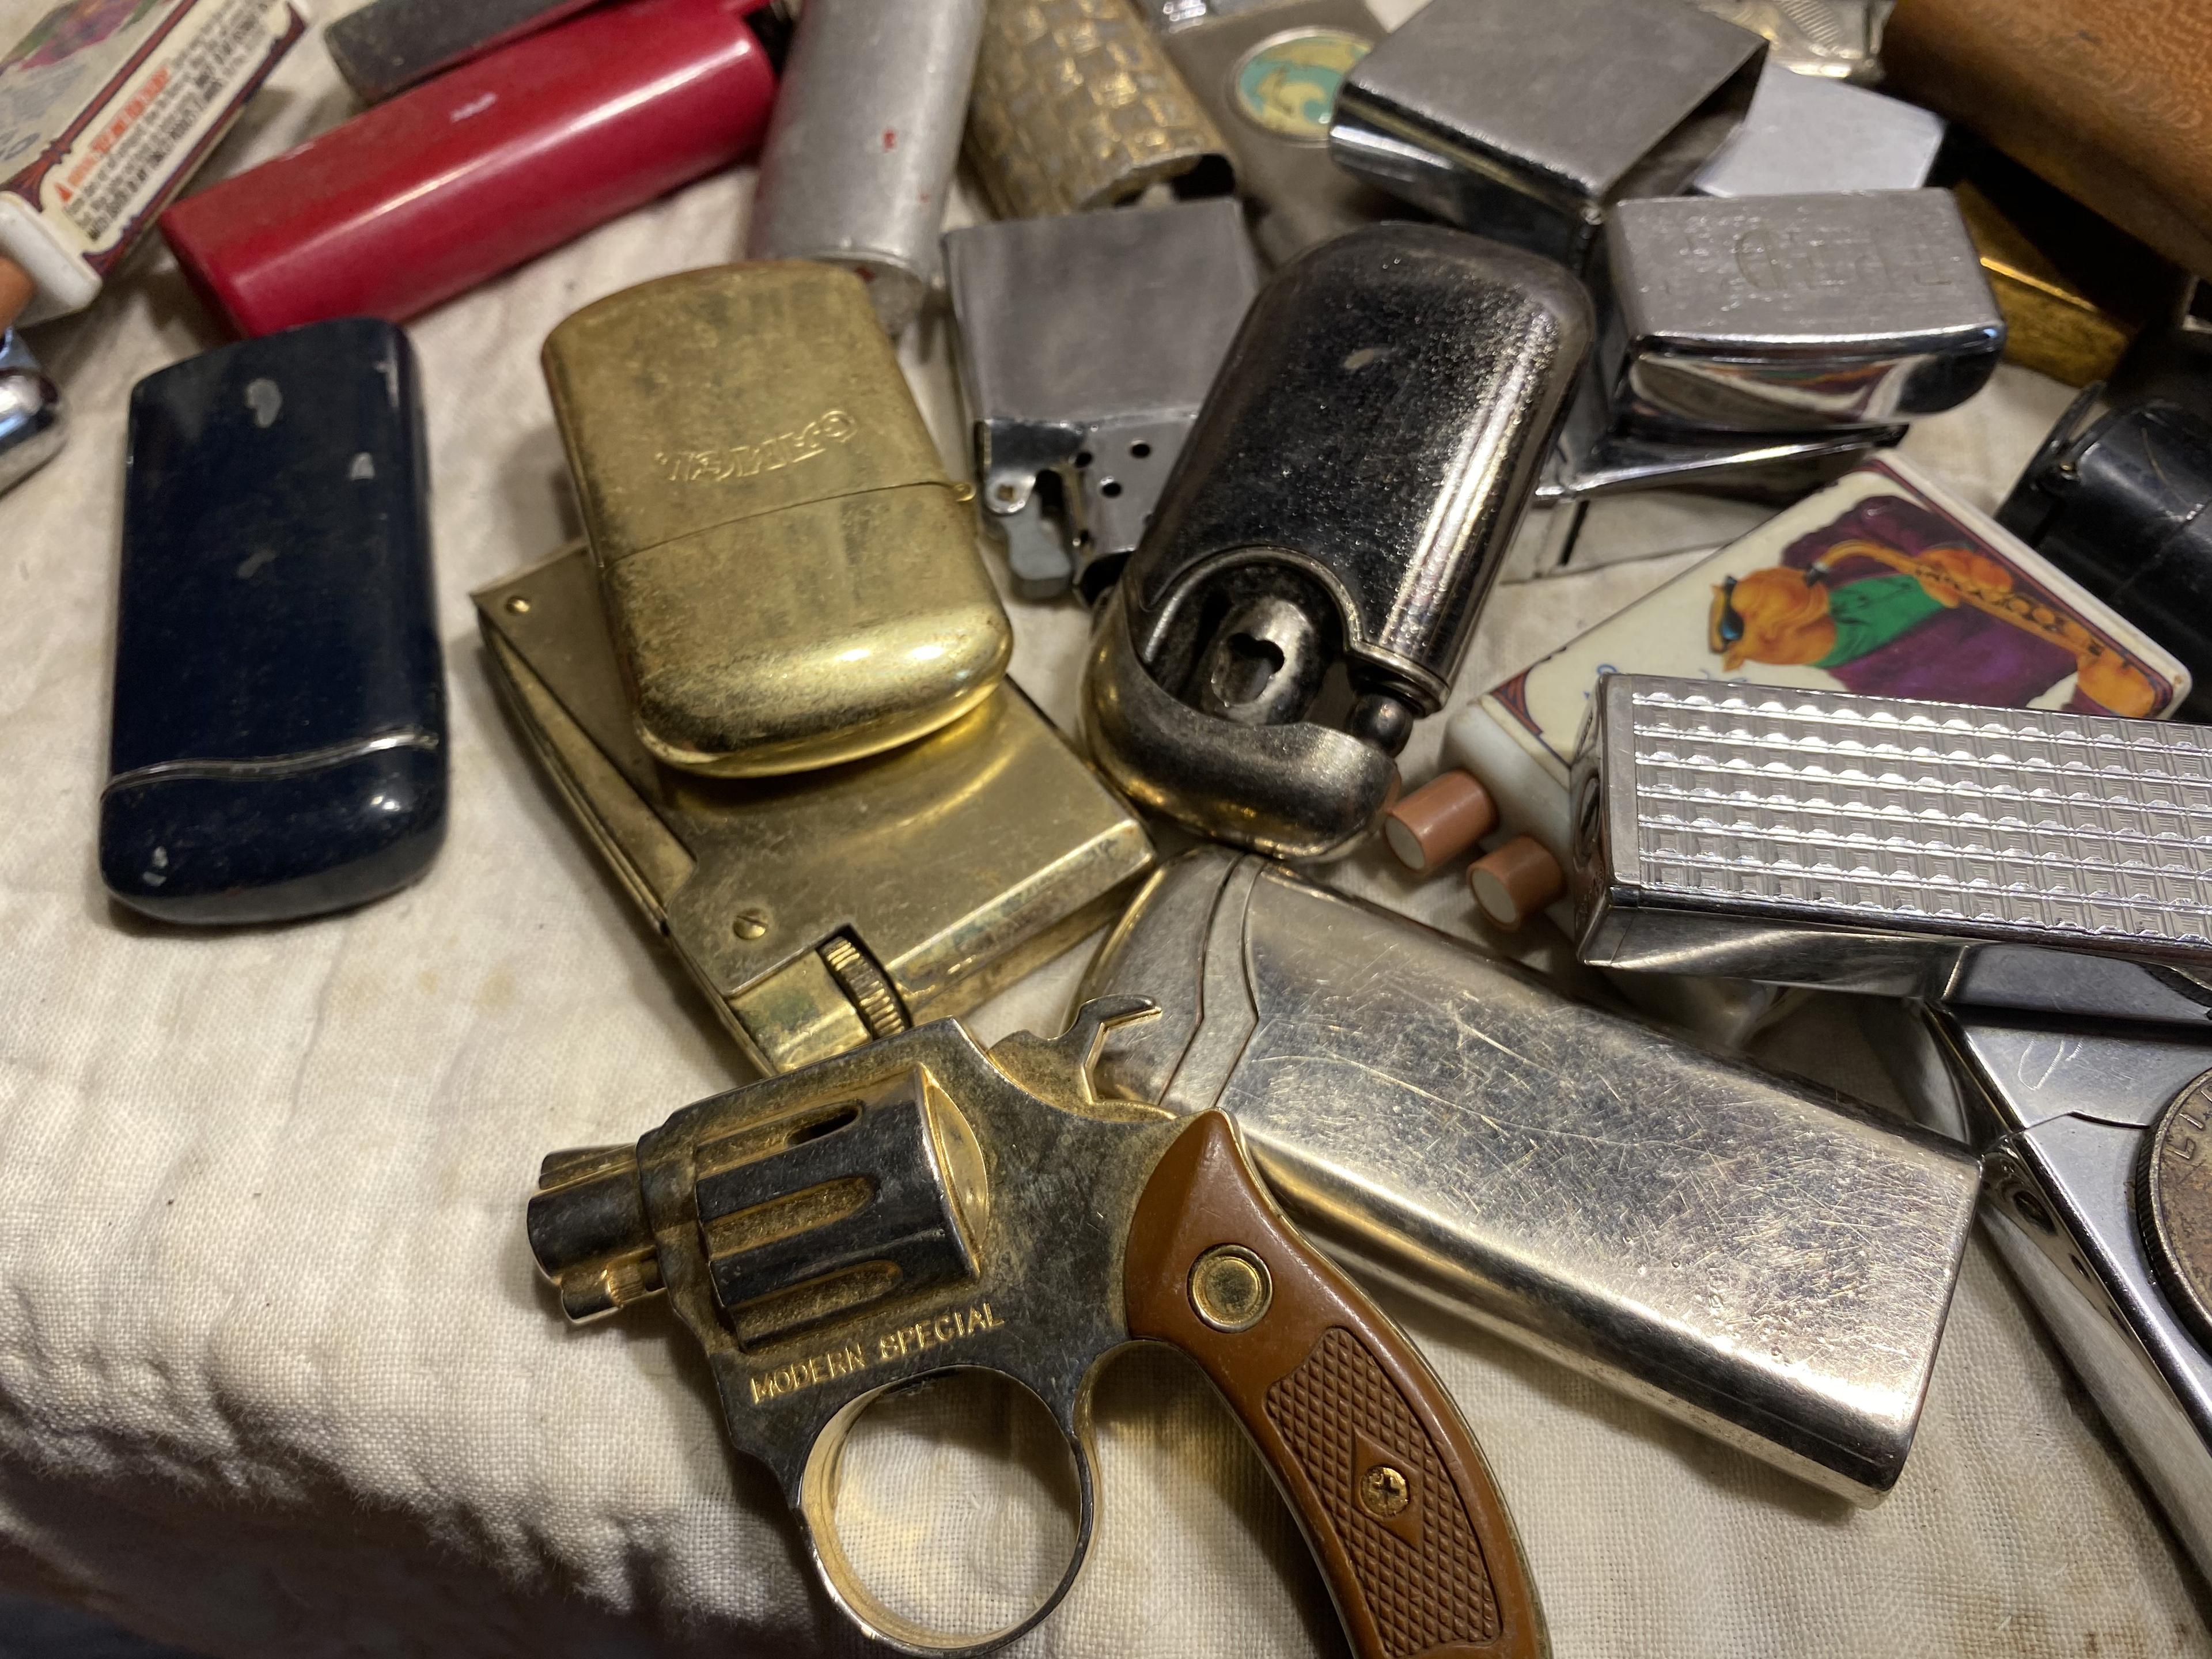 Group lot of assorted vintage lighters